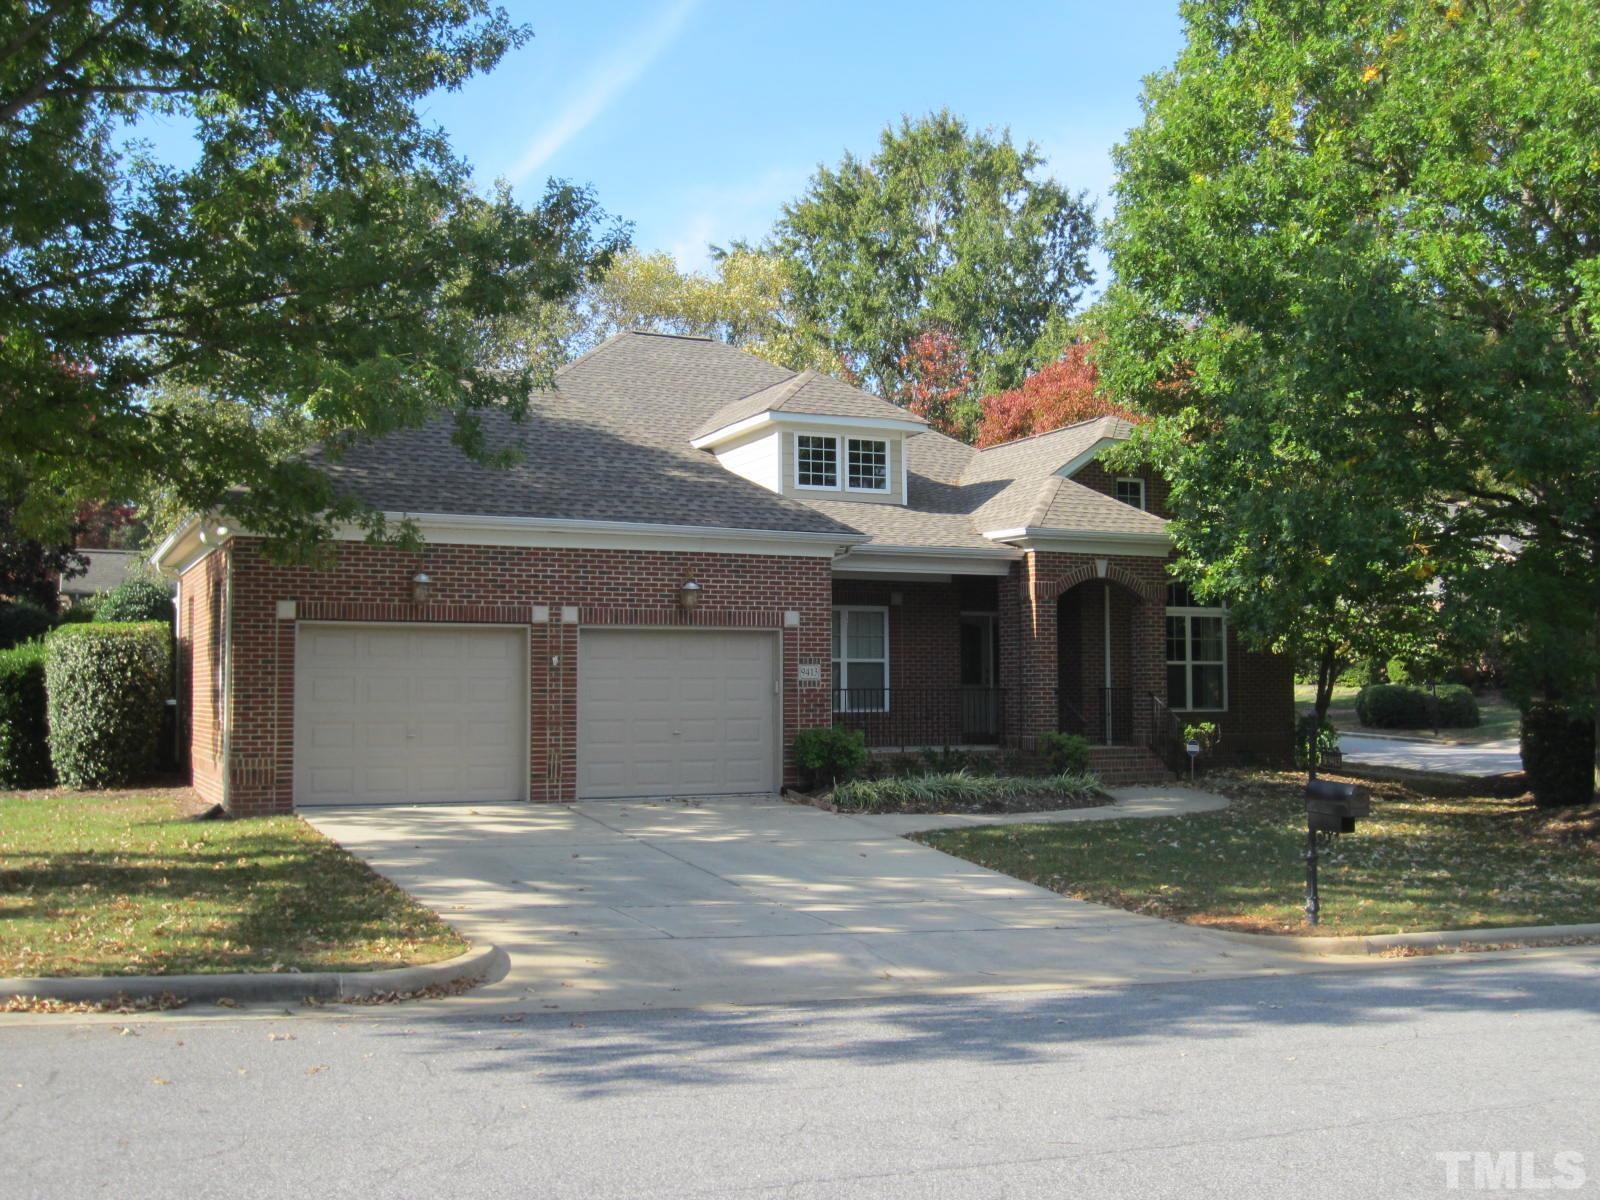 a front view of a house with a yard garage and trees